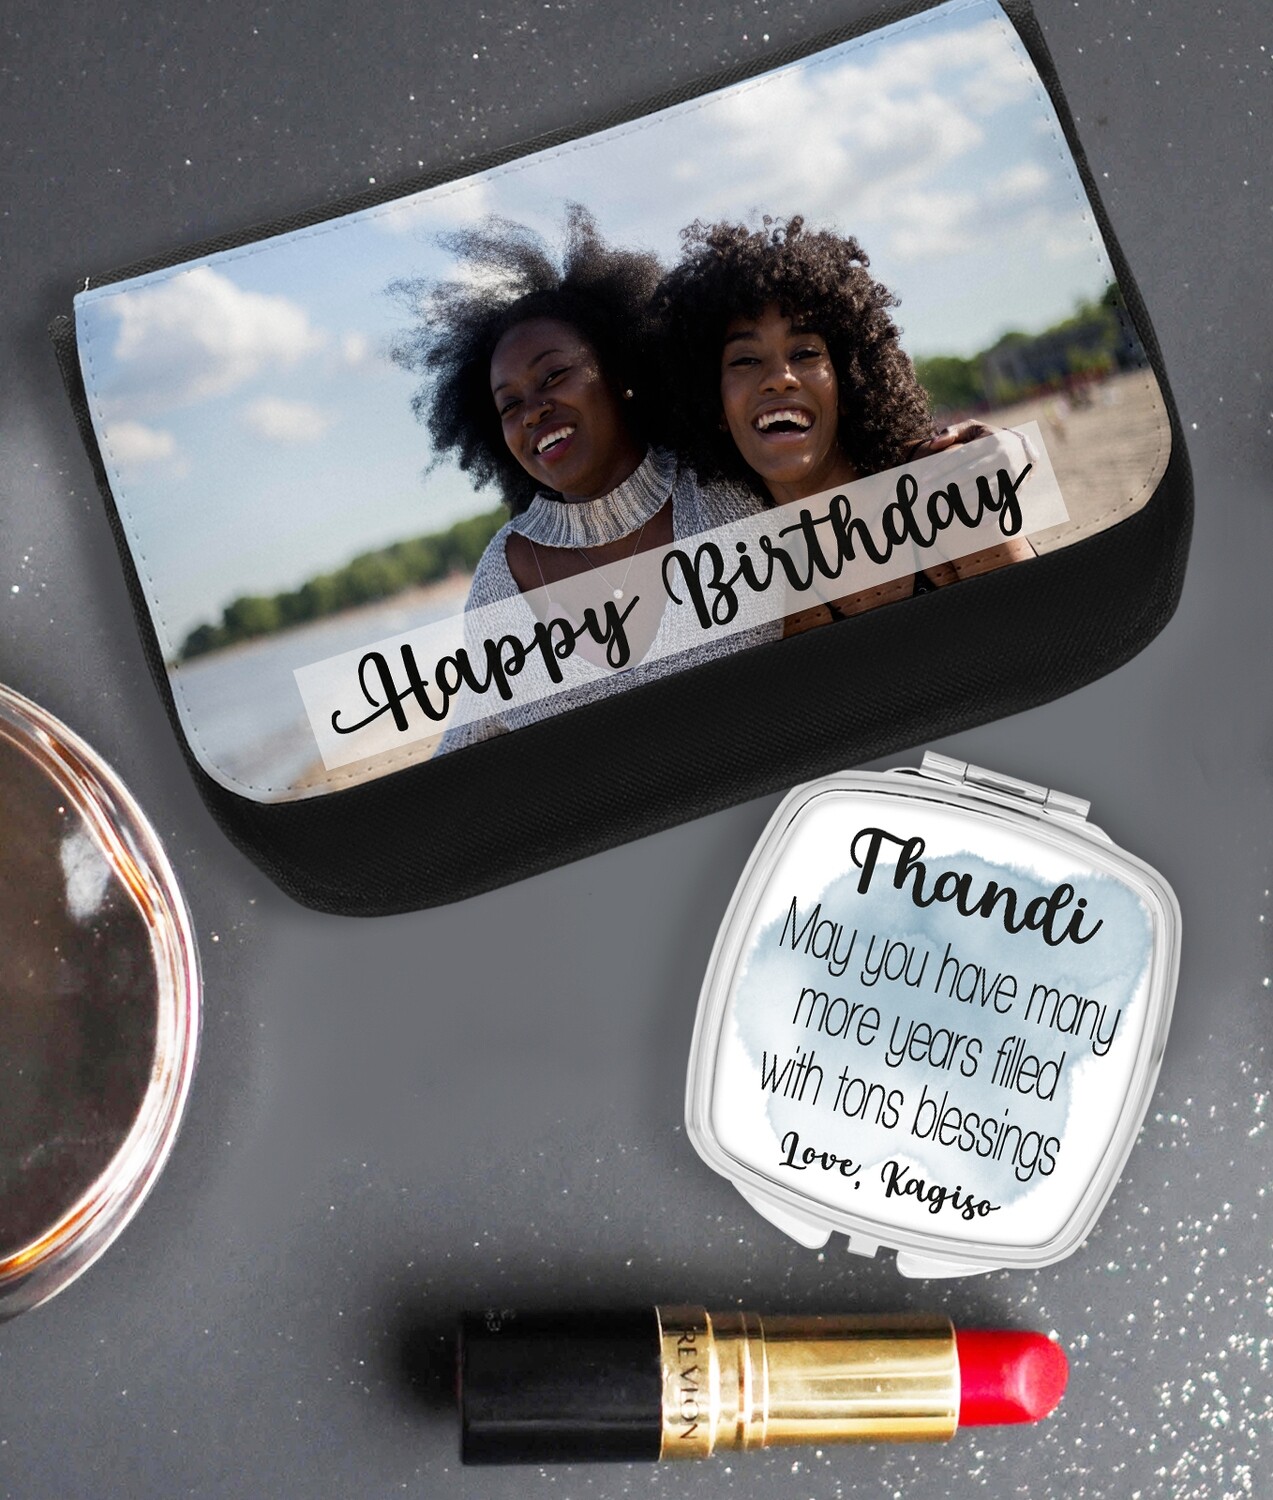 Personalized Photo Mirror & Cosmetic Bag